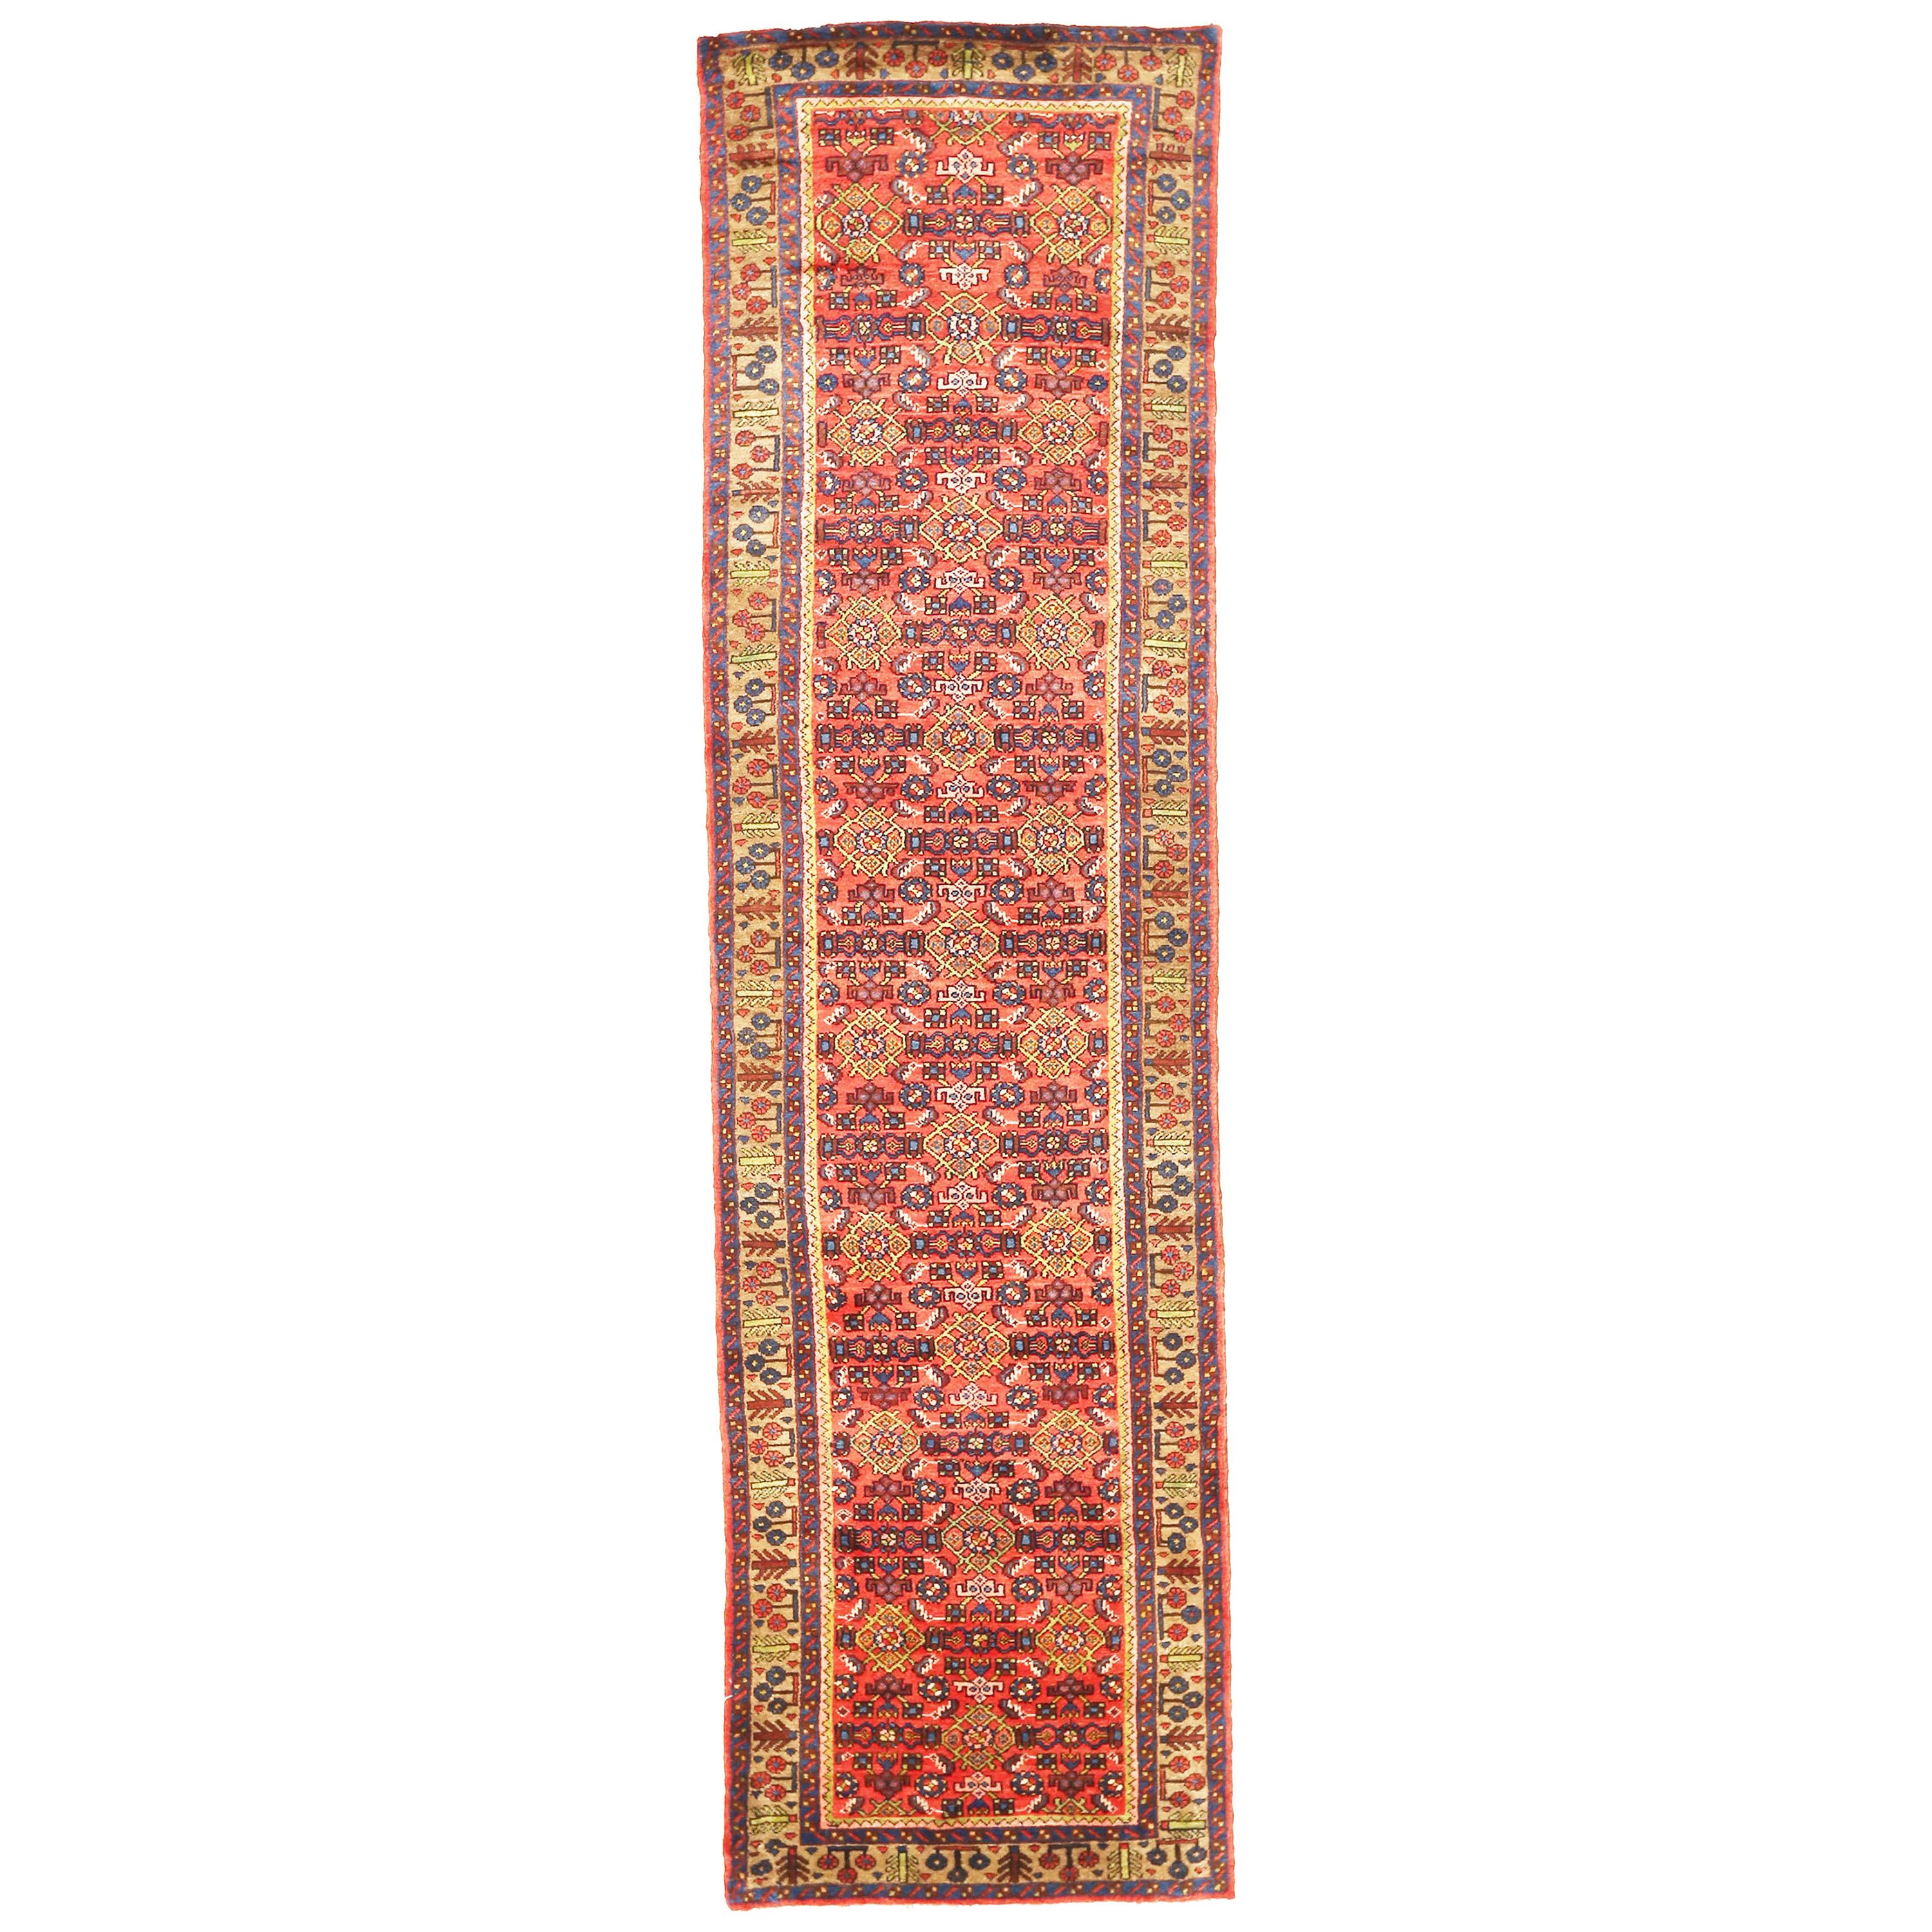 Antique Persian Malayer Runner Rug with Yellow and Blue Floral Patterns